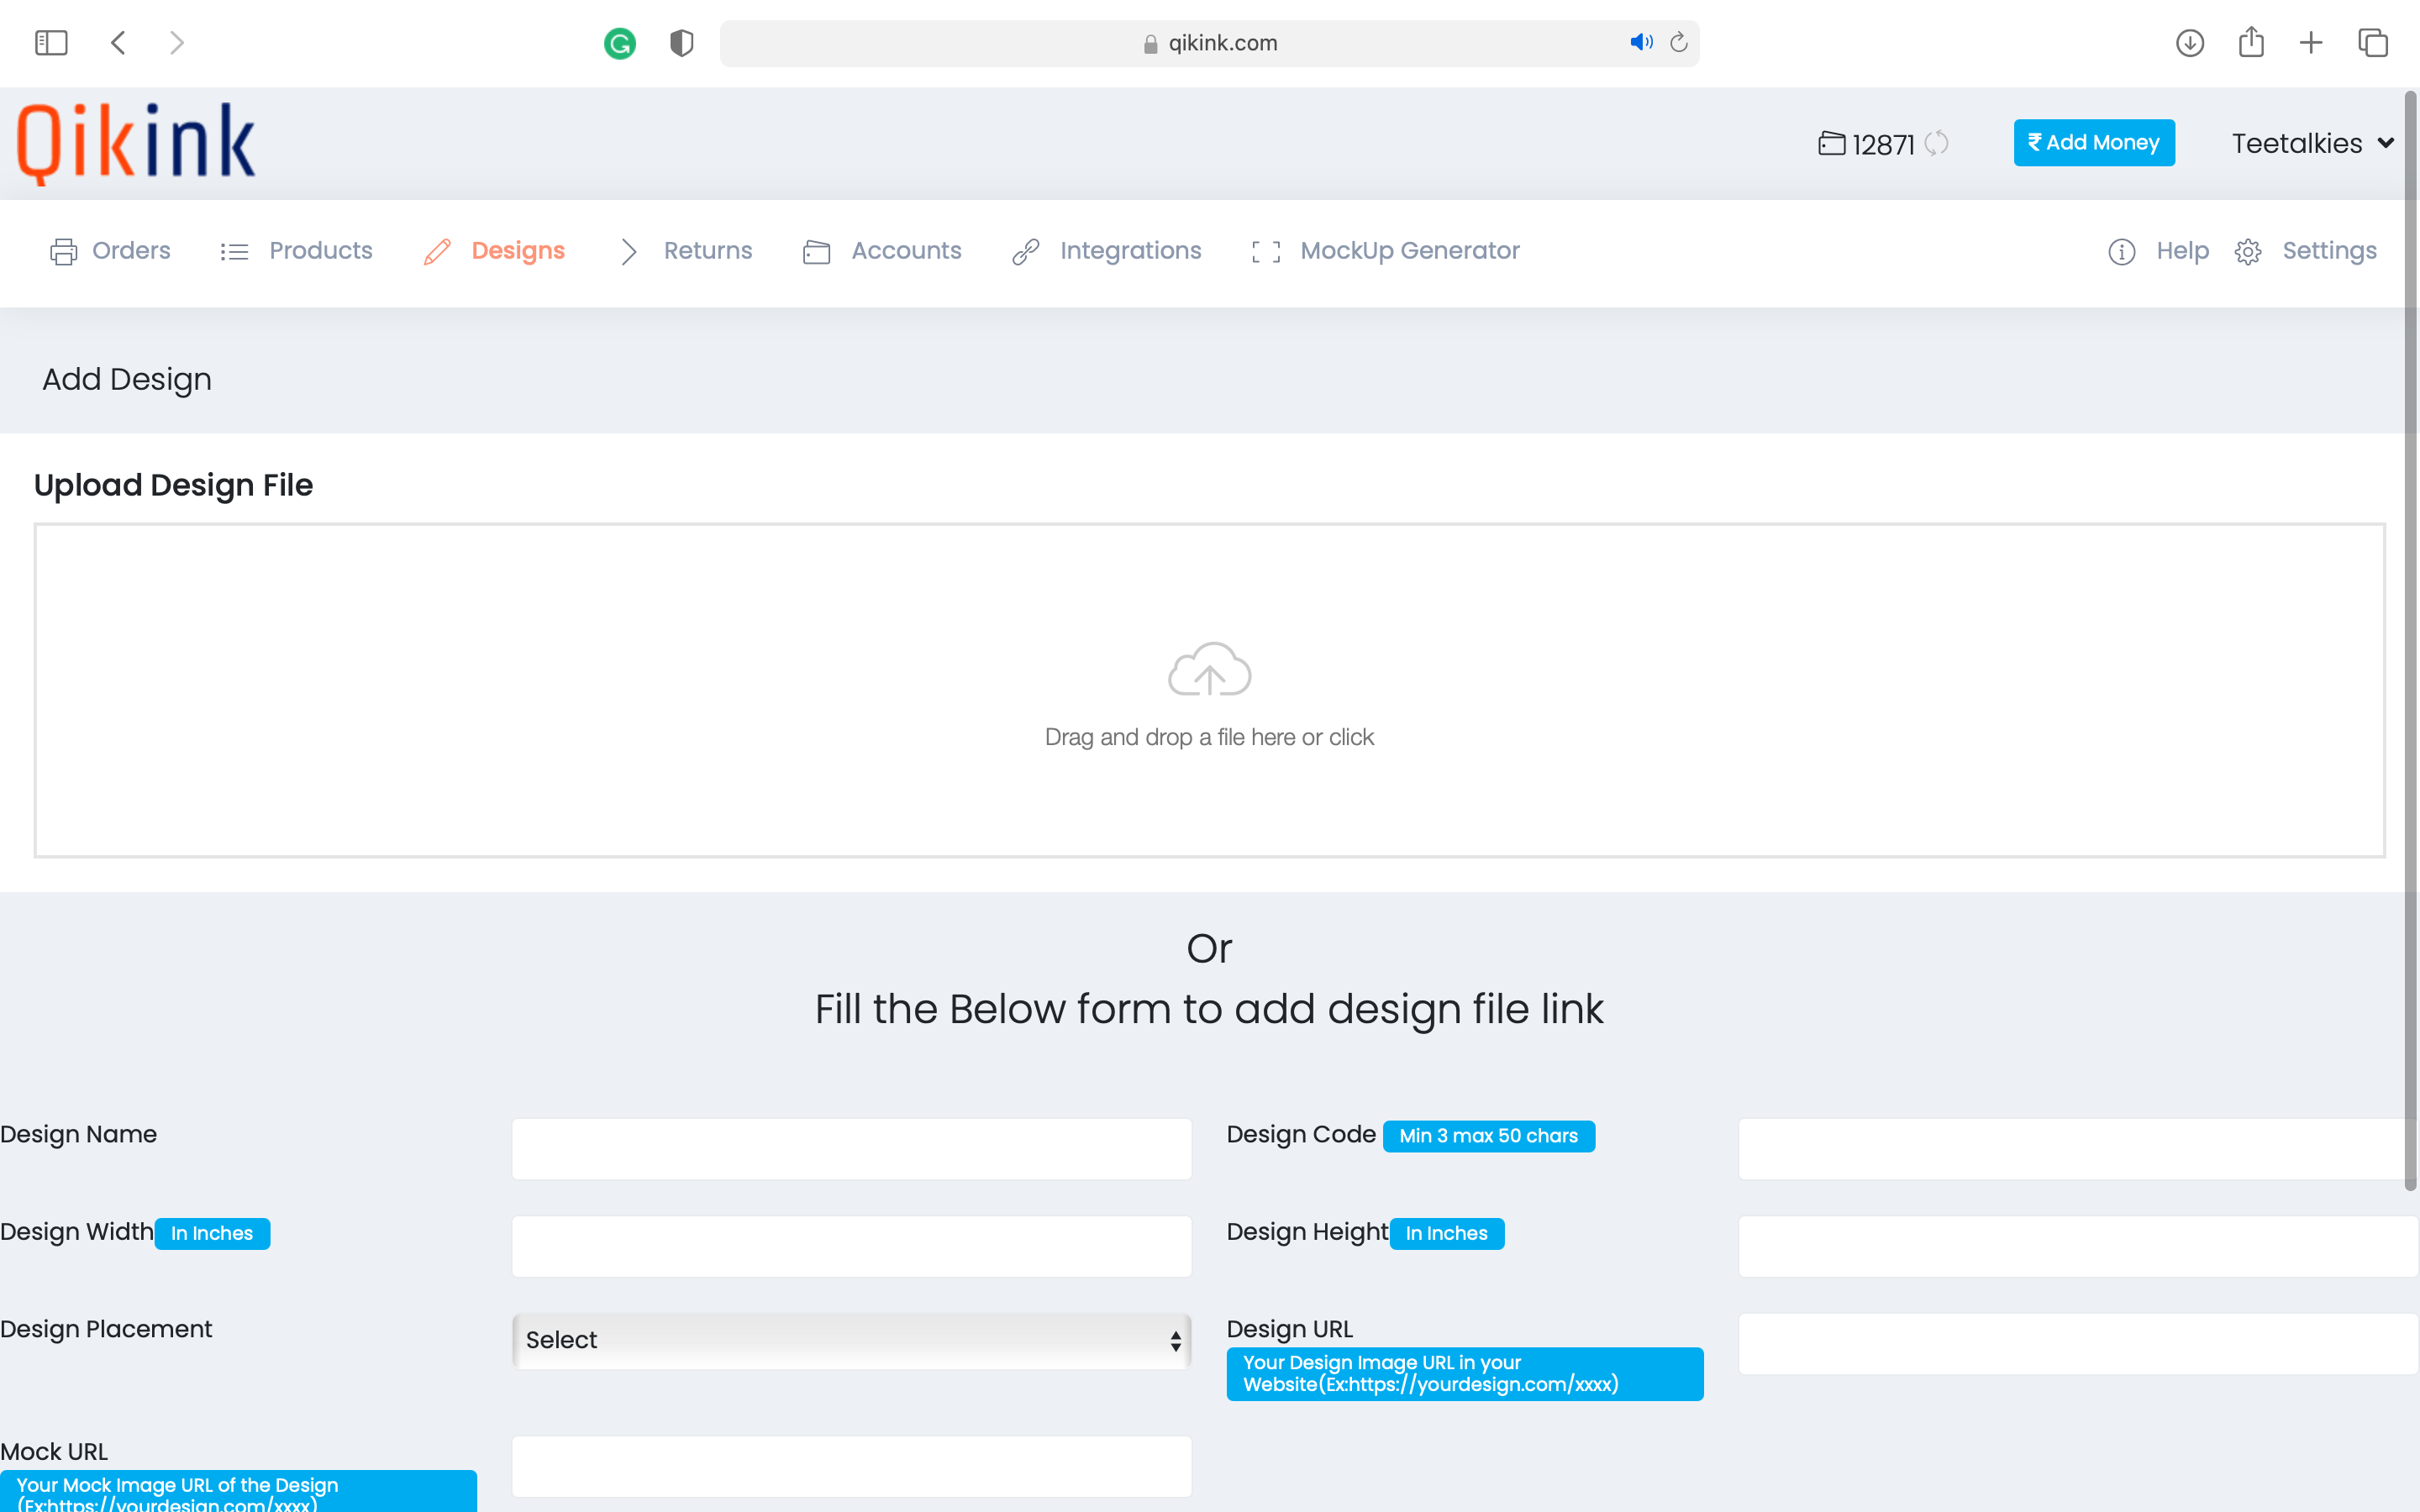 tab for upload design into the qikink dashboard by insert option